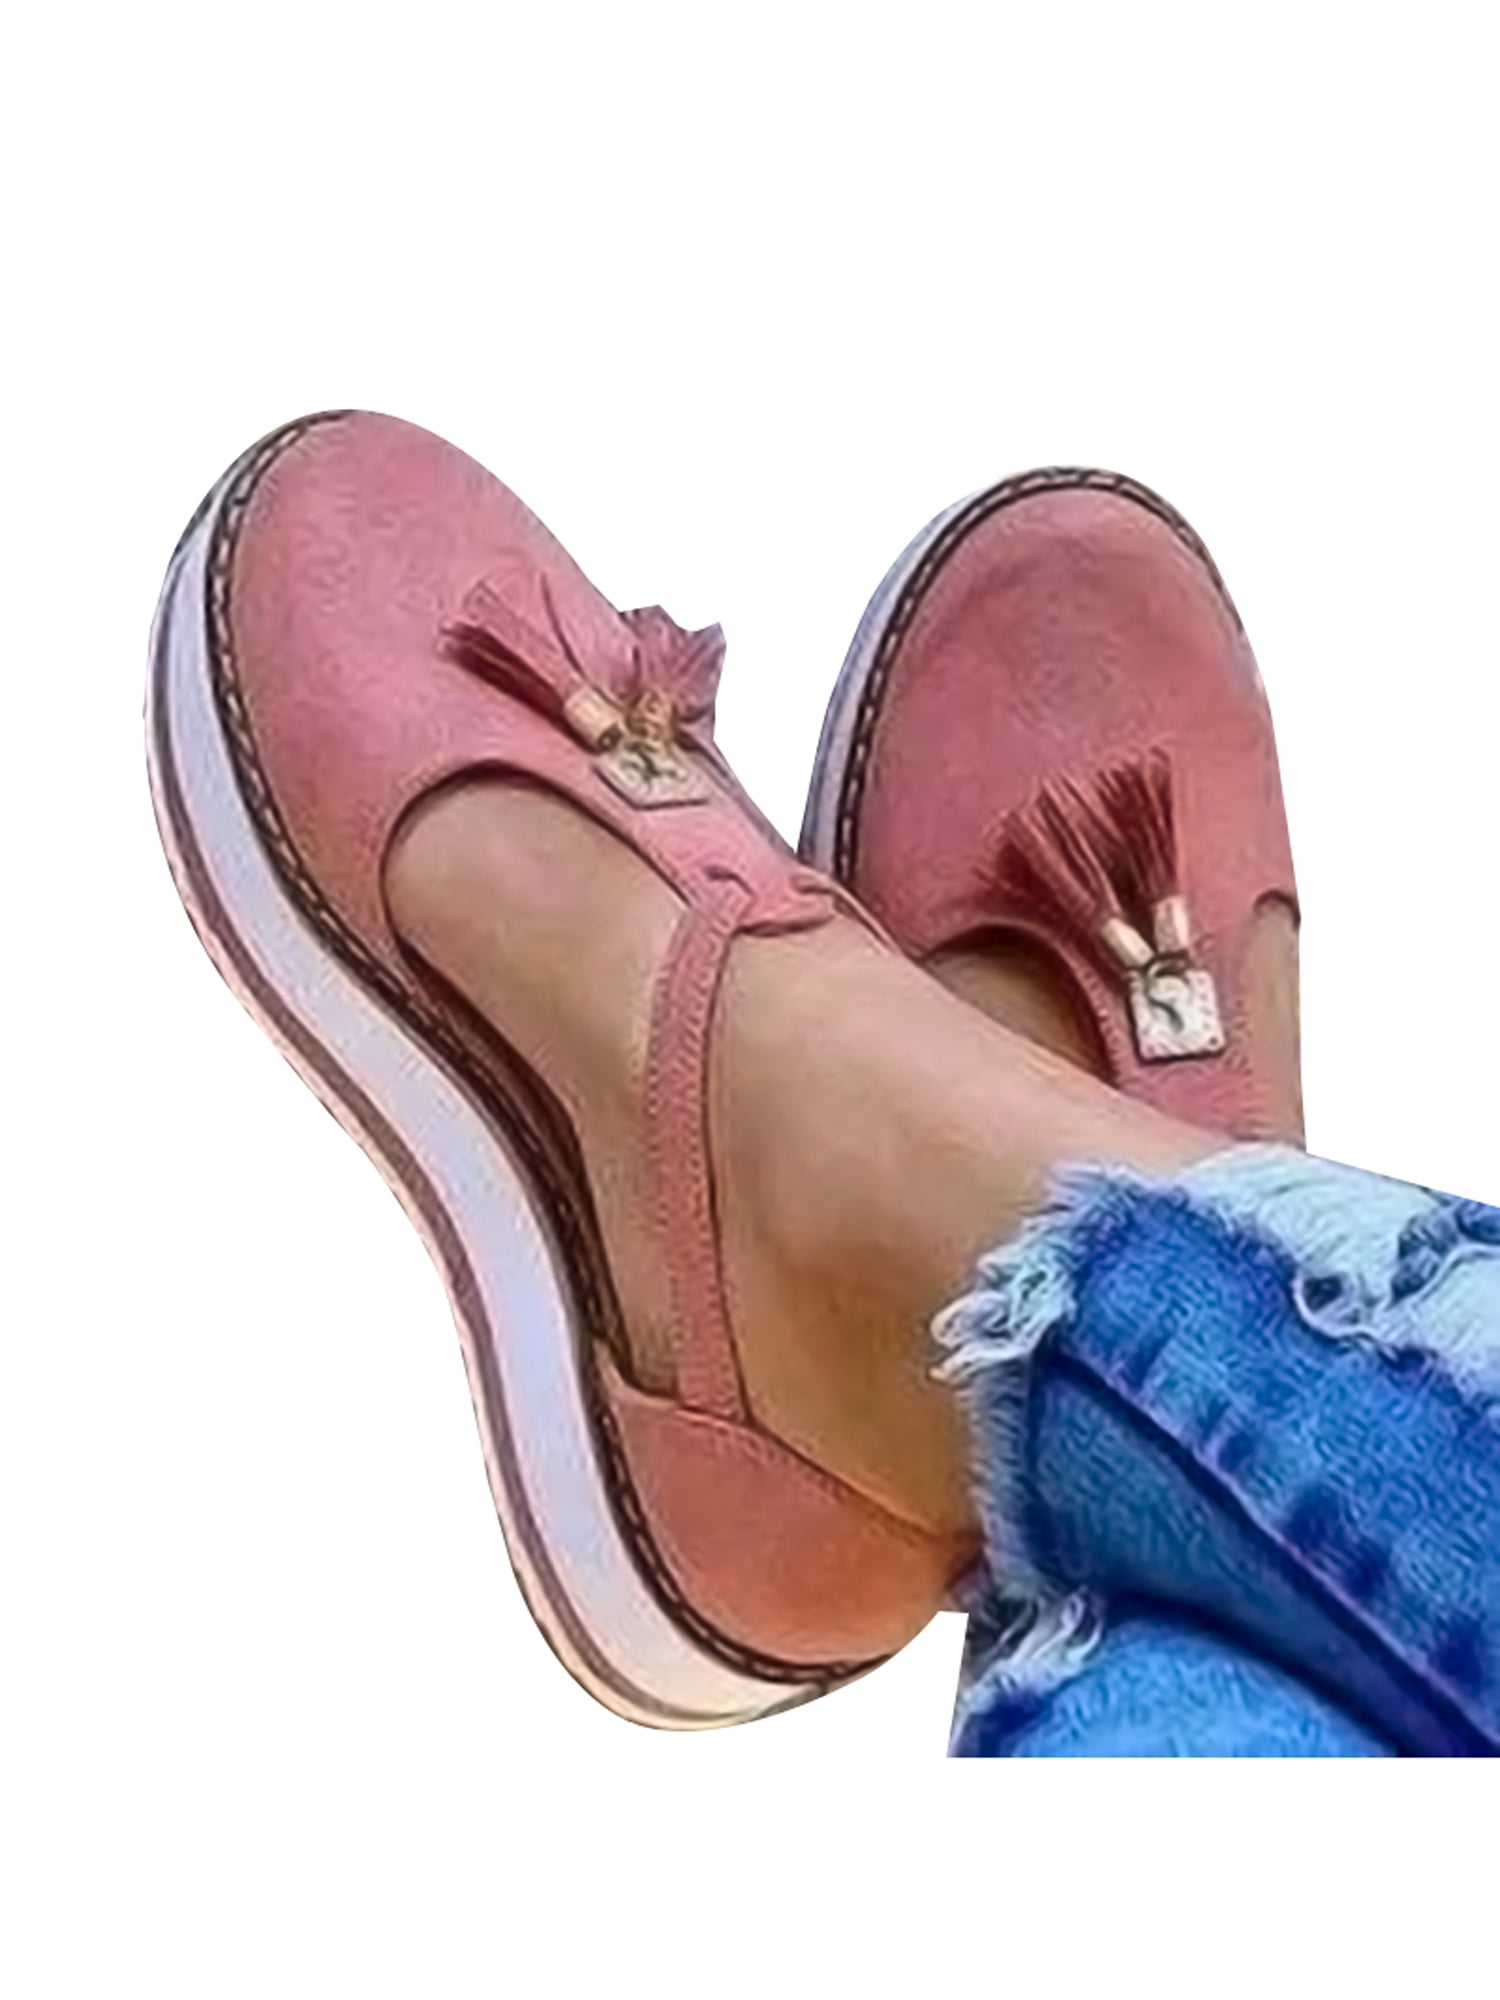 WOMENS LADIES TASSEL FASHION SLIP ON SUMMER CASUAL SMART CLEATED SOLE SHOES SIZE 